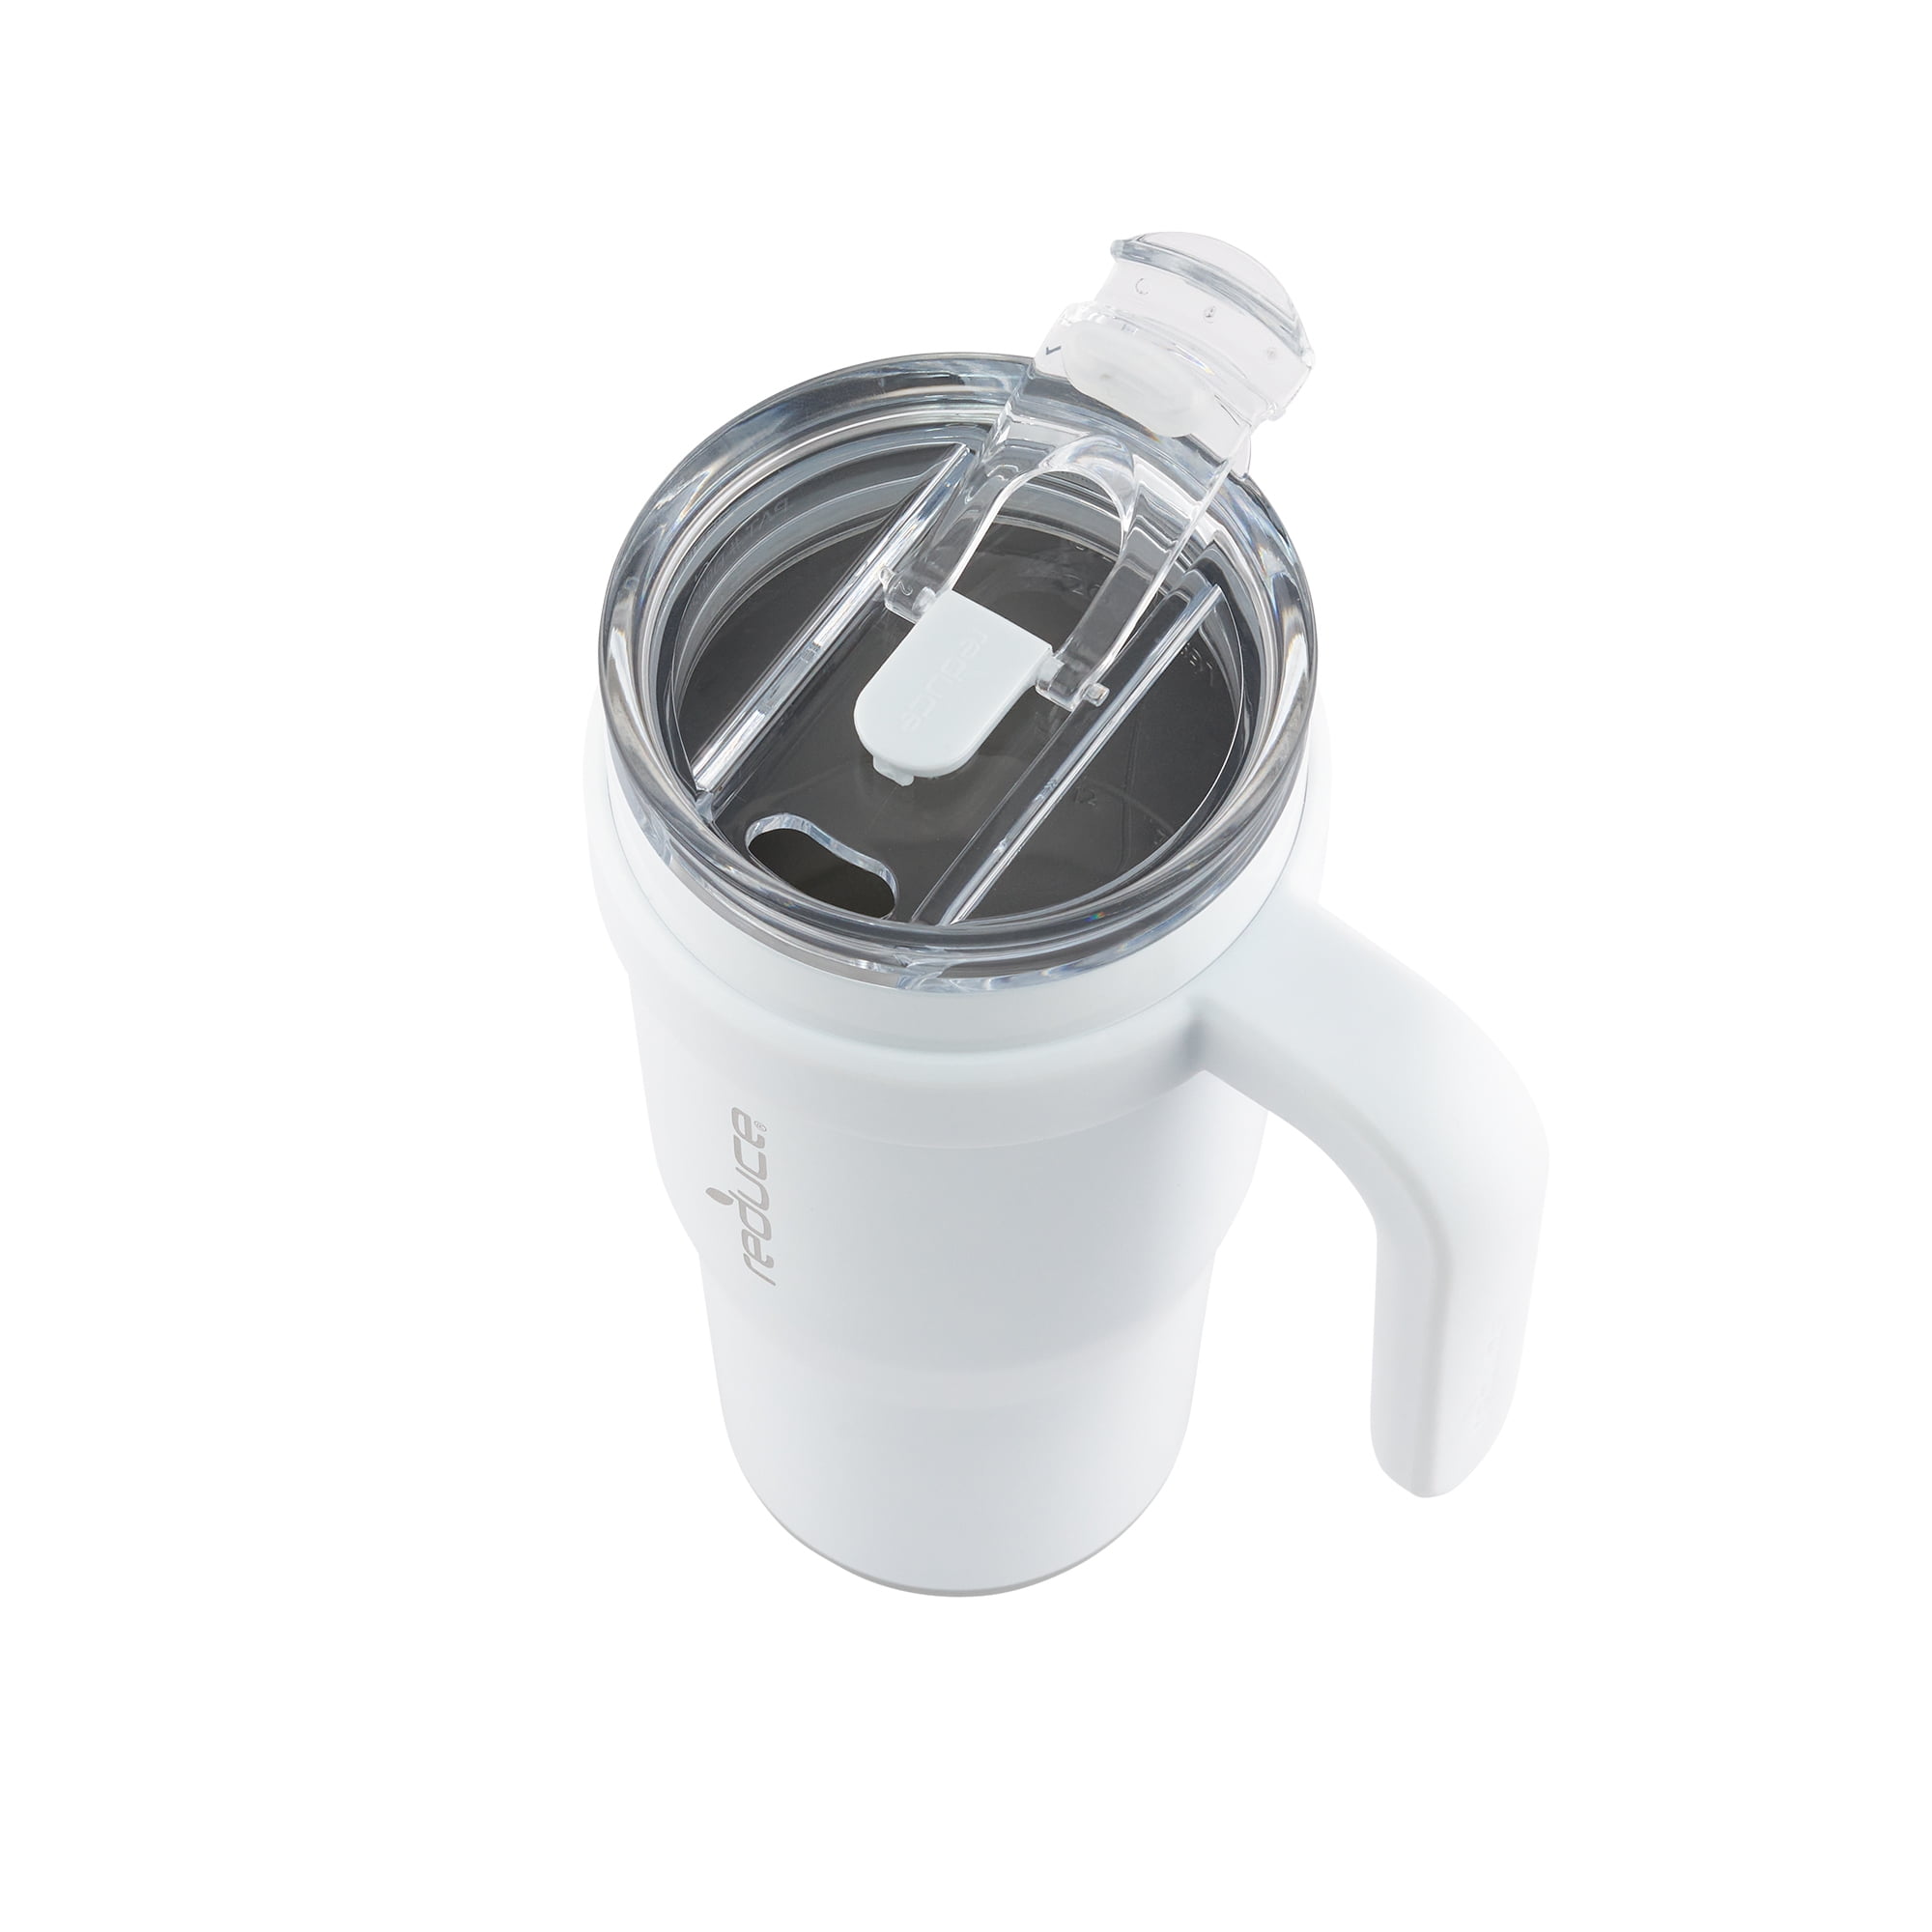 REDUCE brand Cold1 Tumblers/Mugs and other 14-18oz mouth Replacement Lid  (3.0 inch diameter) and Str…See more REDUCE brand Cold1 Tumblers/Mugs and